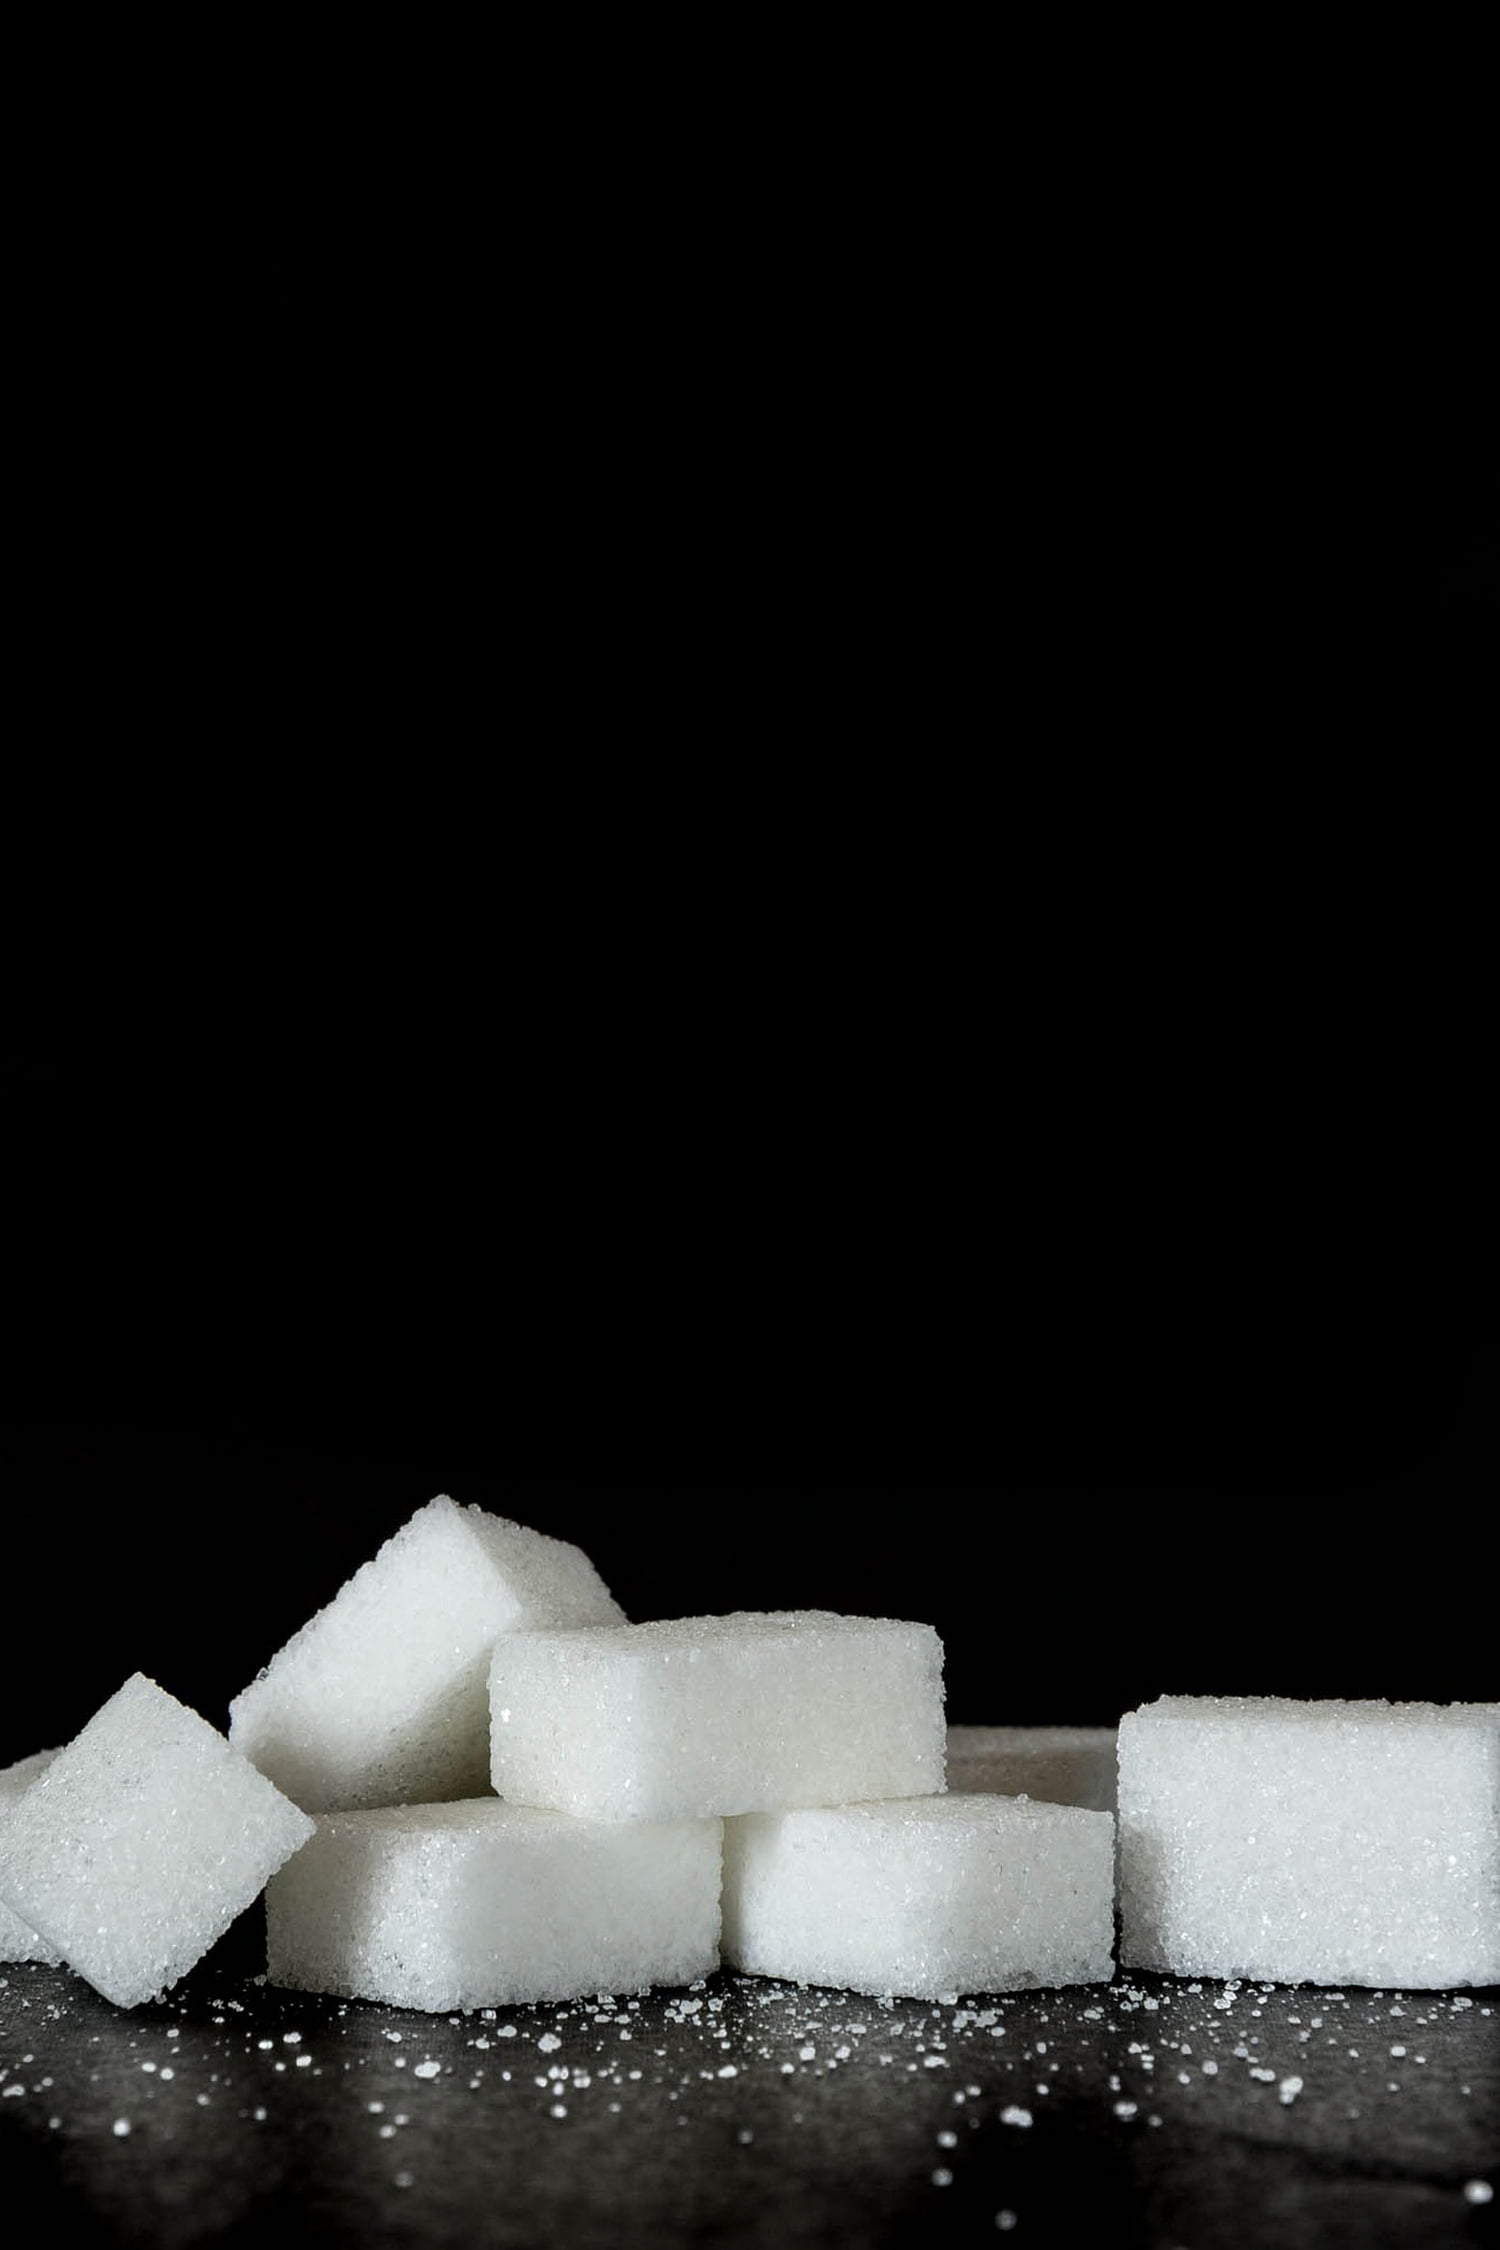 Sugar cubes in front of a black background.